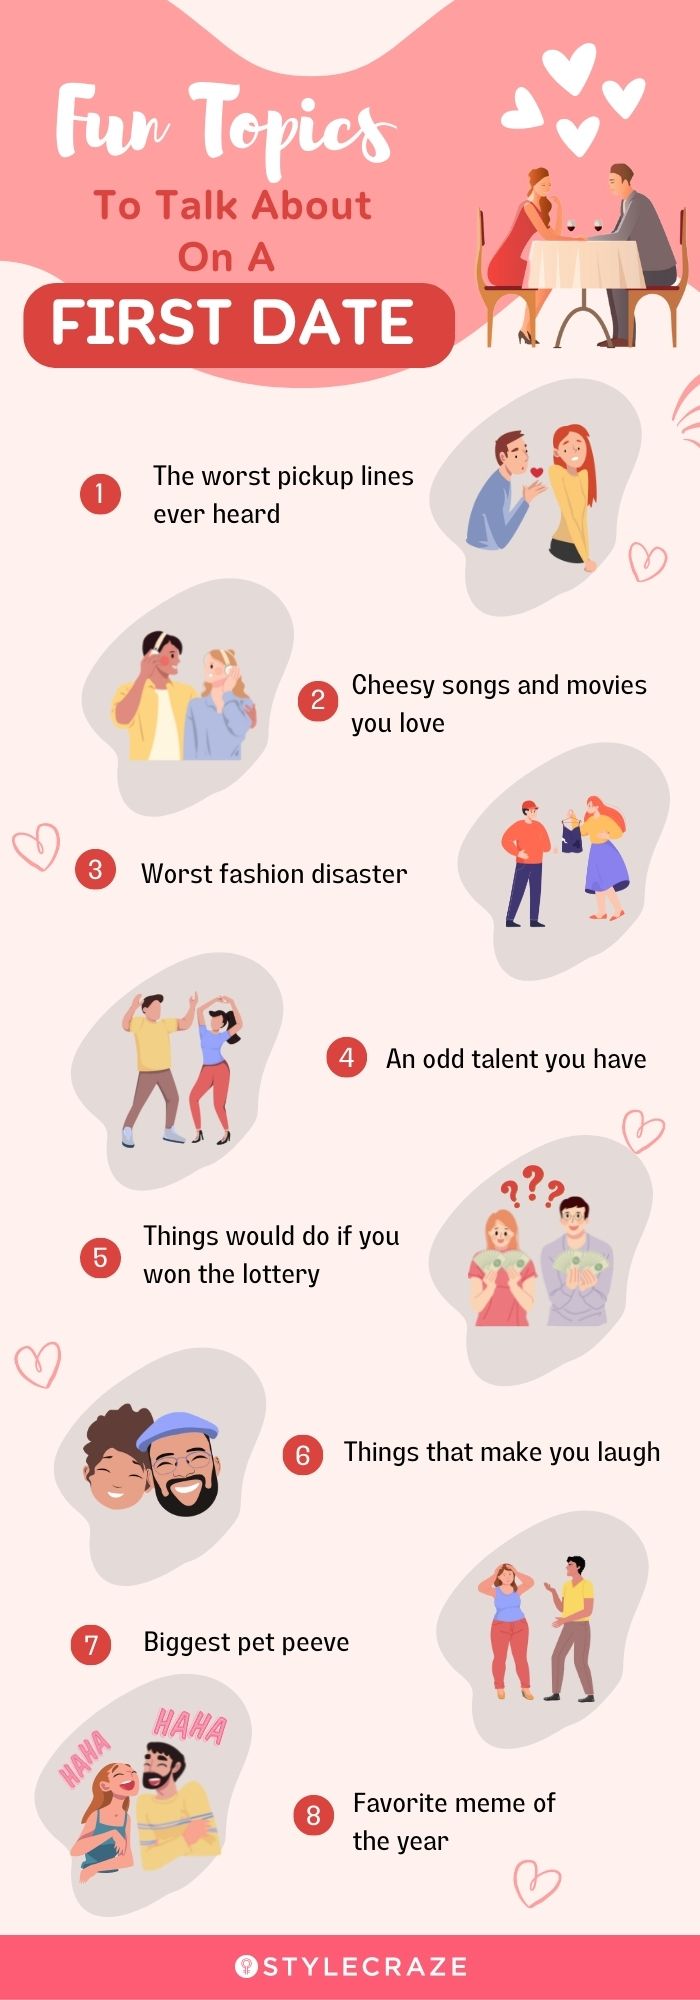 fun topics to talk about on a first date (infographic)